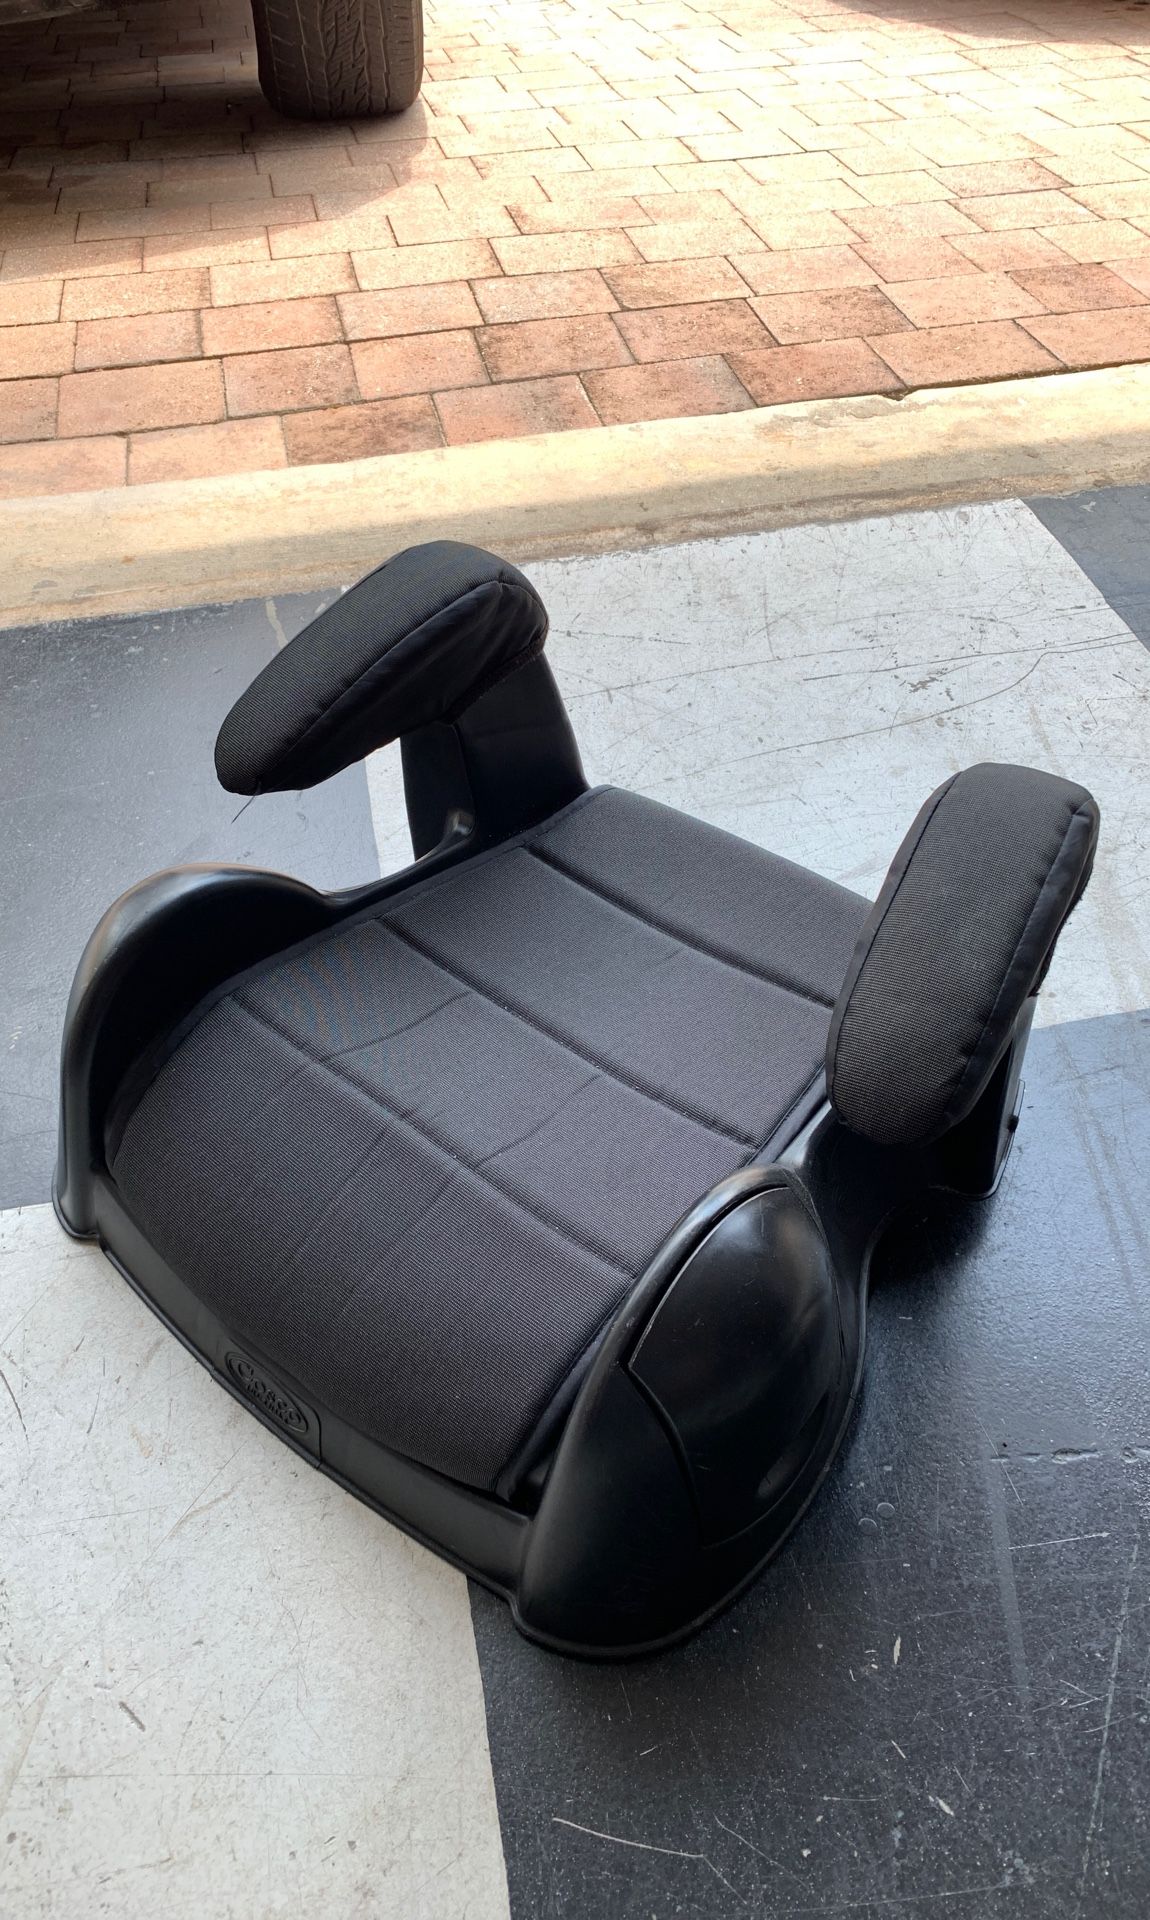 Booster seat used